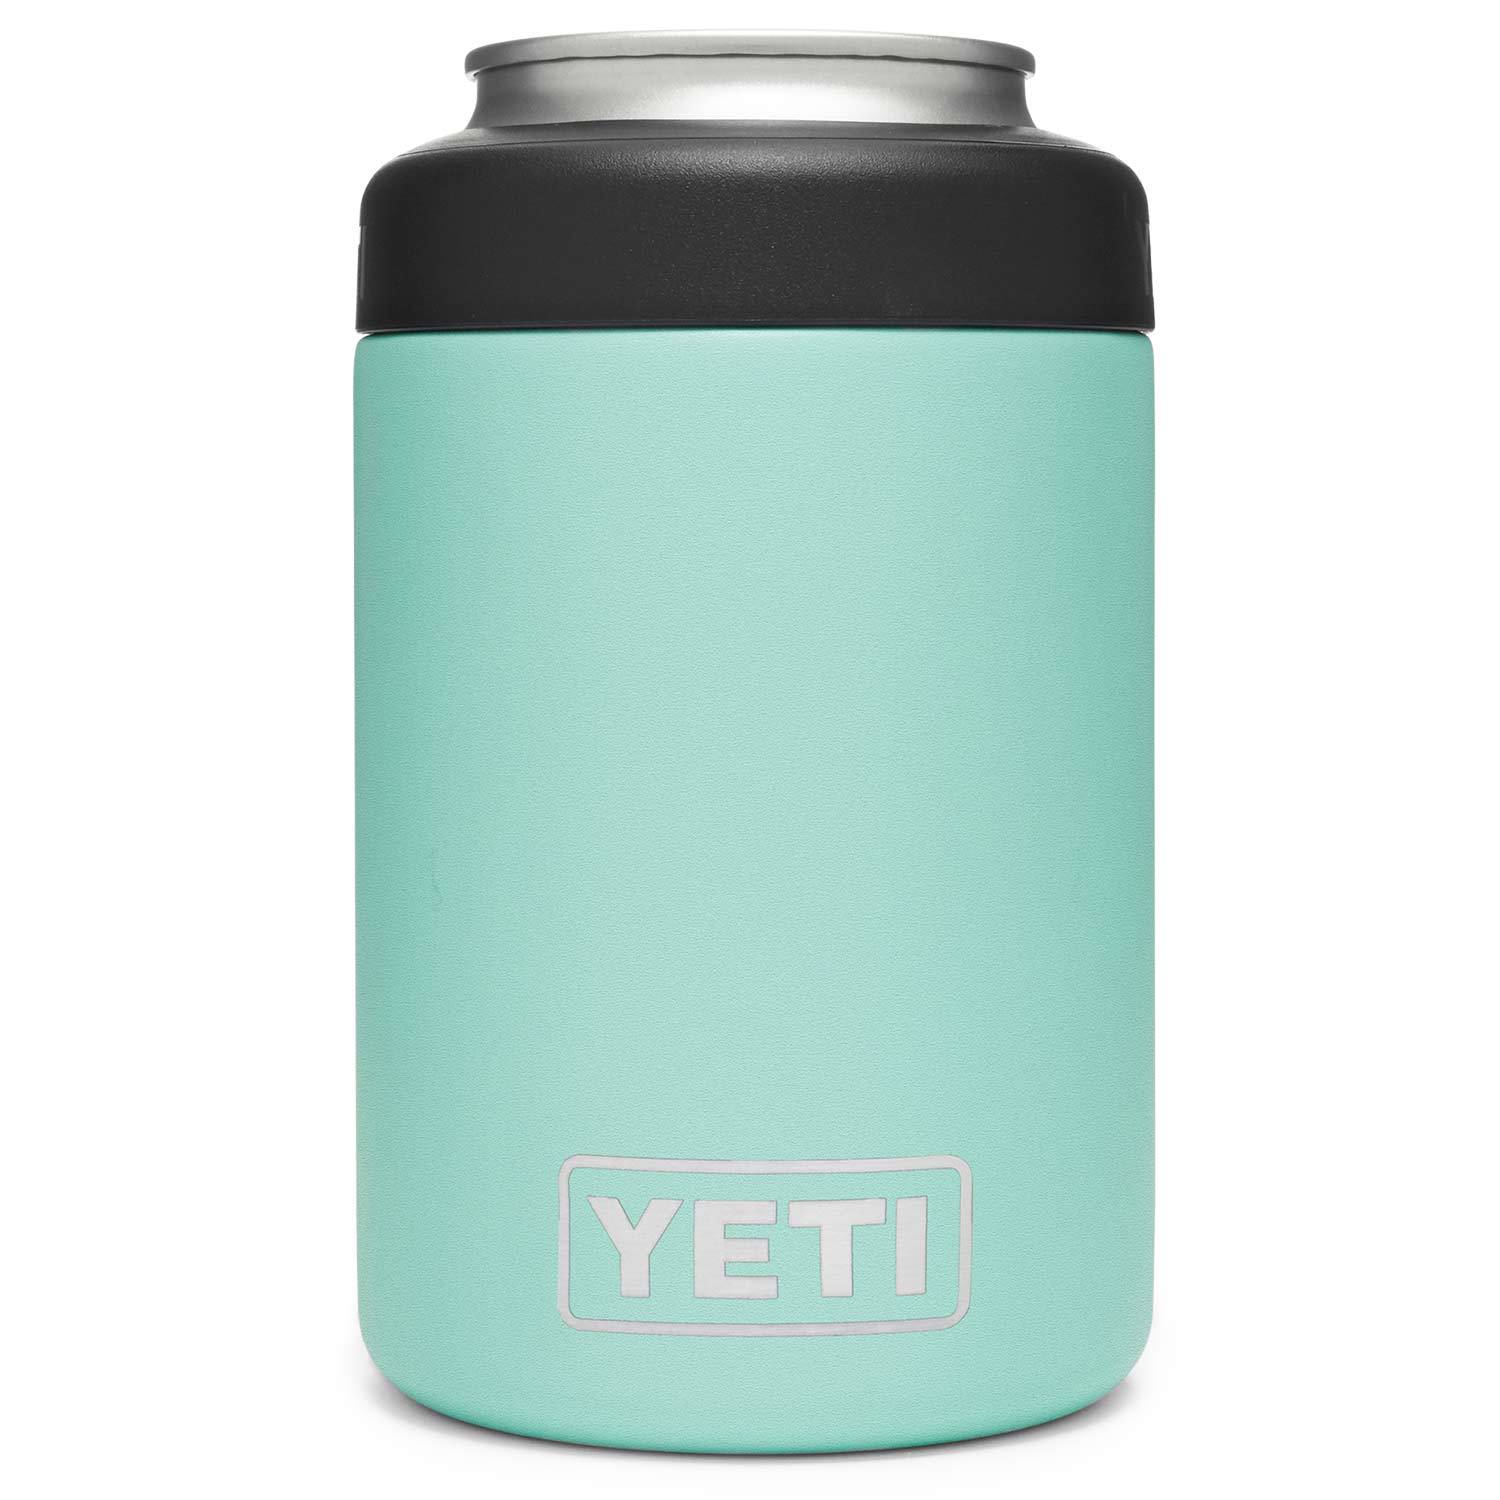 Brent's Travels: Yeti 64oz. Insulated Container